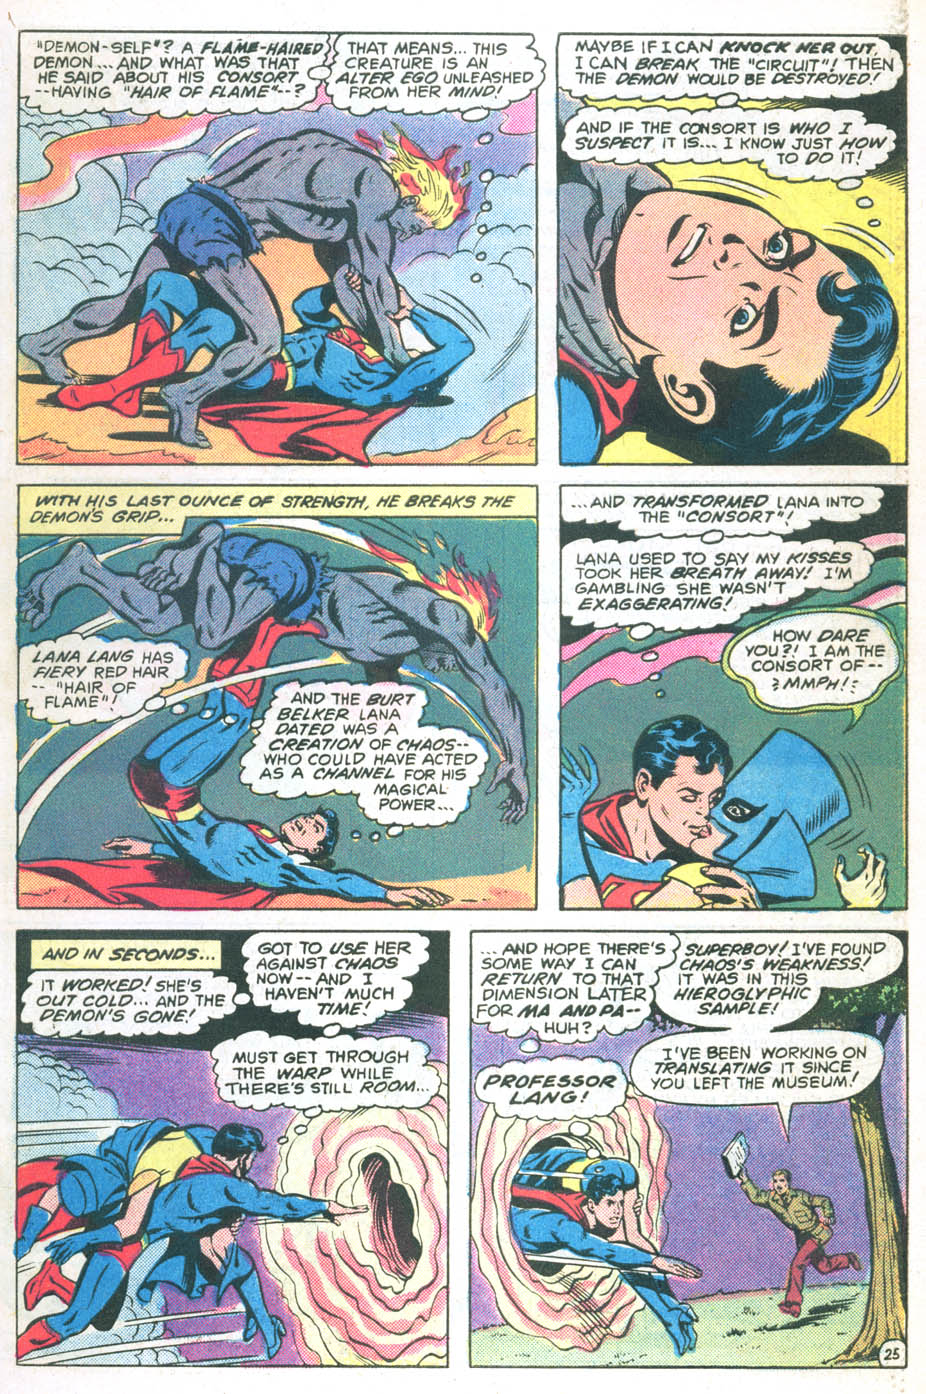 The New Adventures of Superboy 25 Page 25